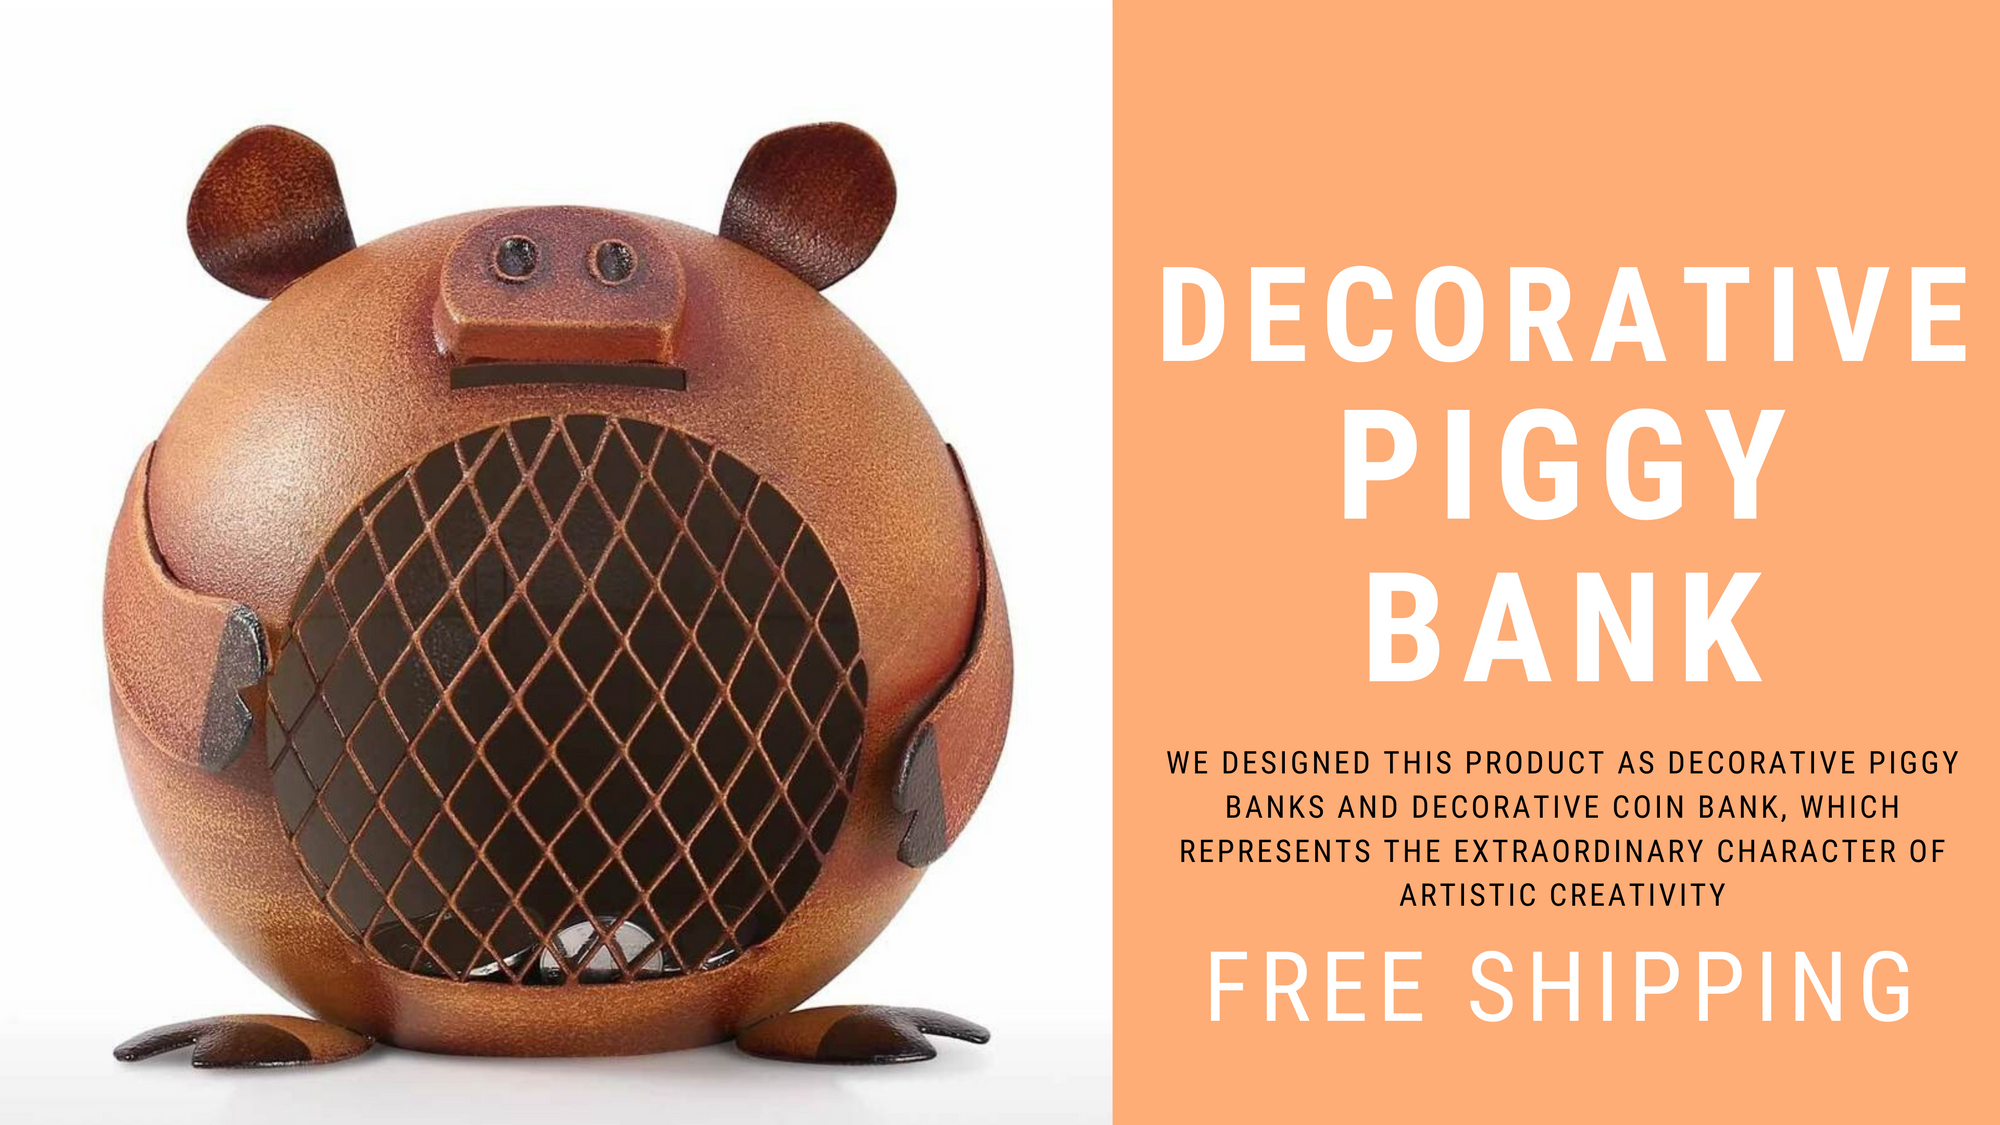 Decorative Piggy and Coin Bank Decoration Ideas in Nursery or Kids Room